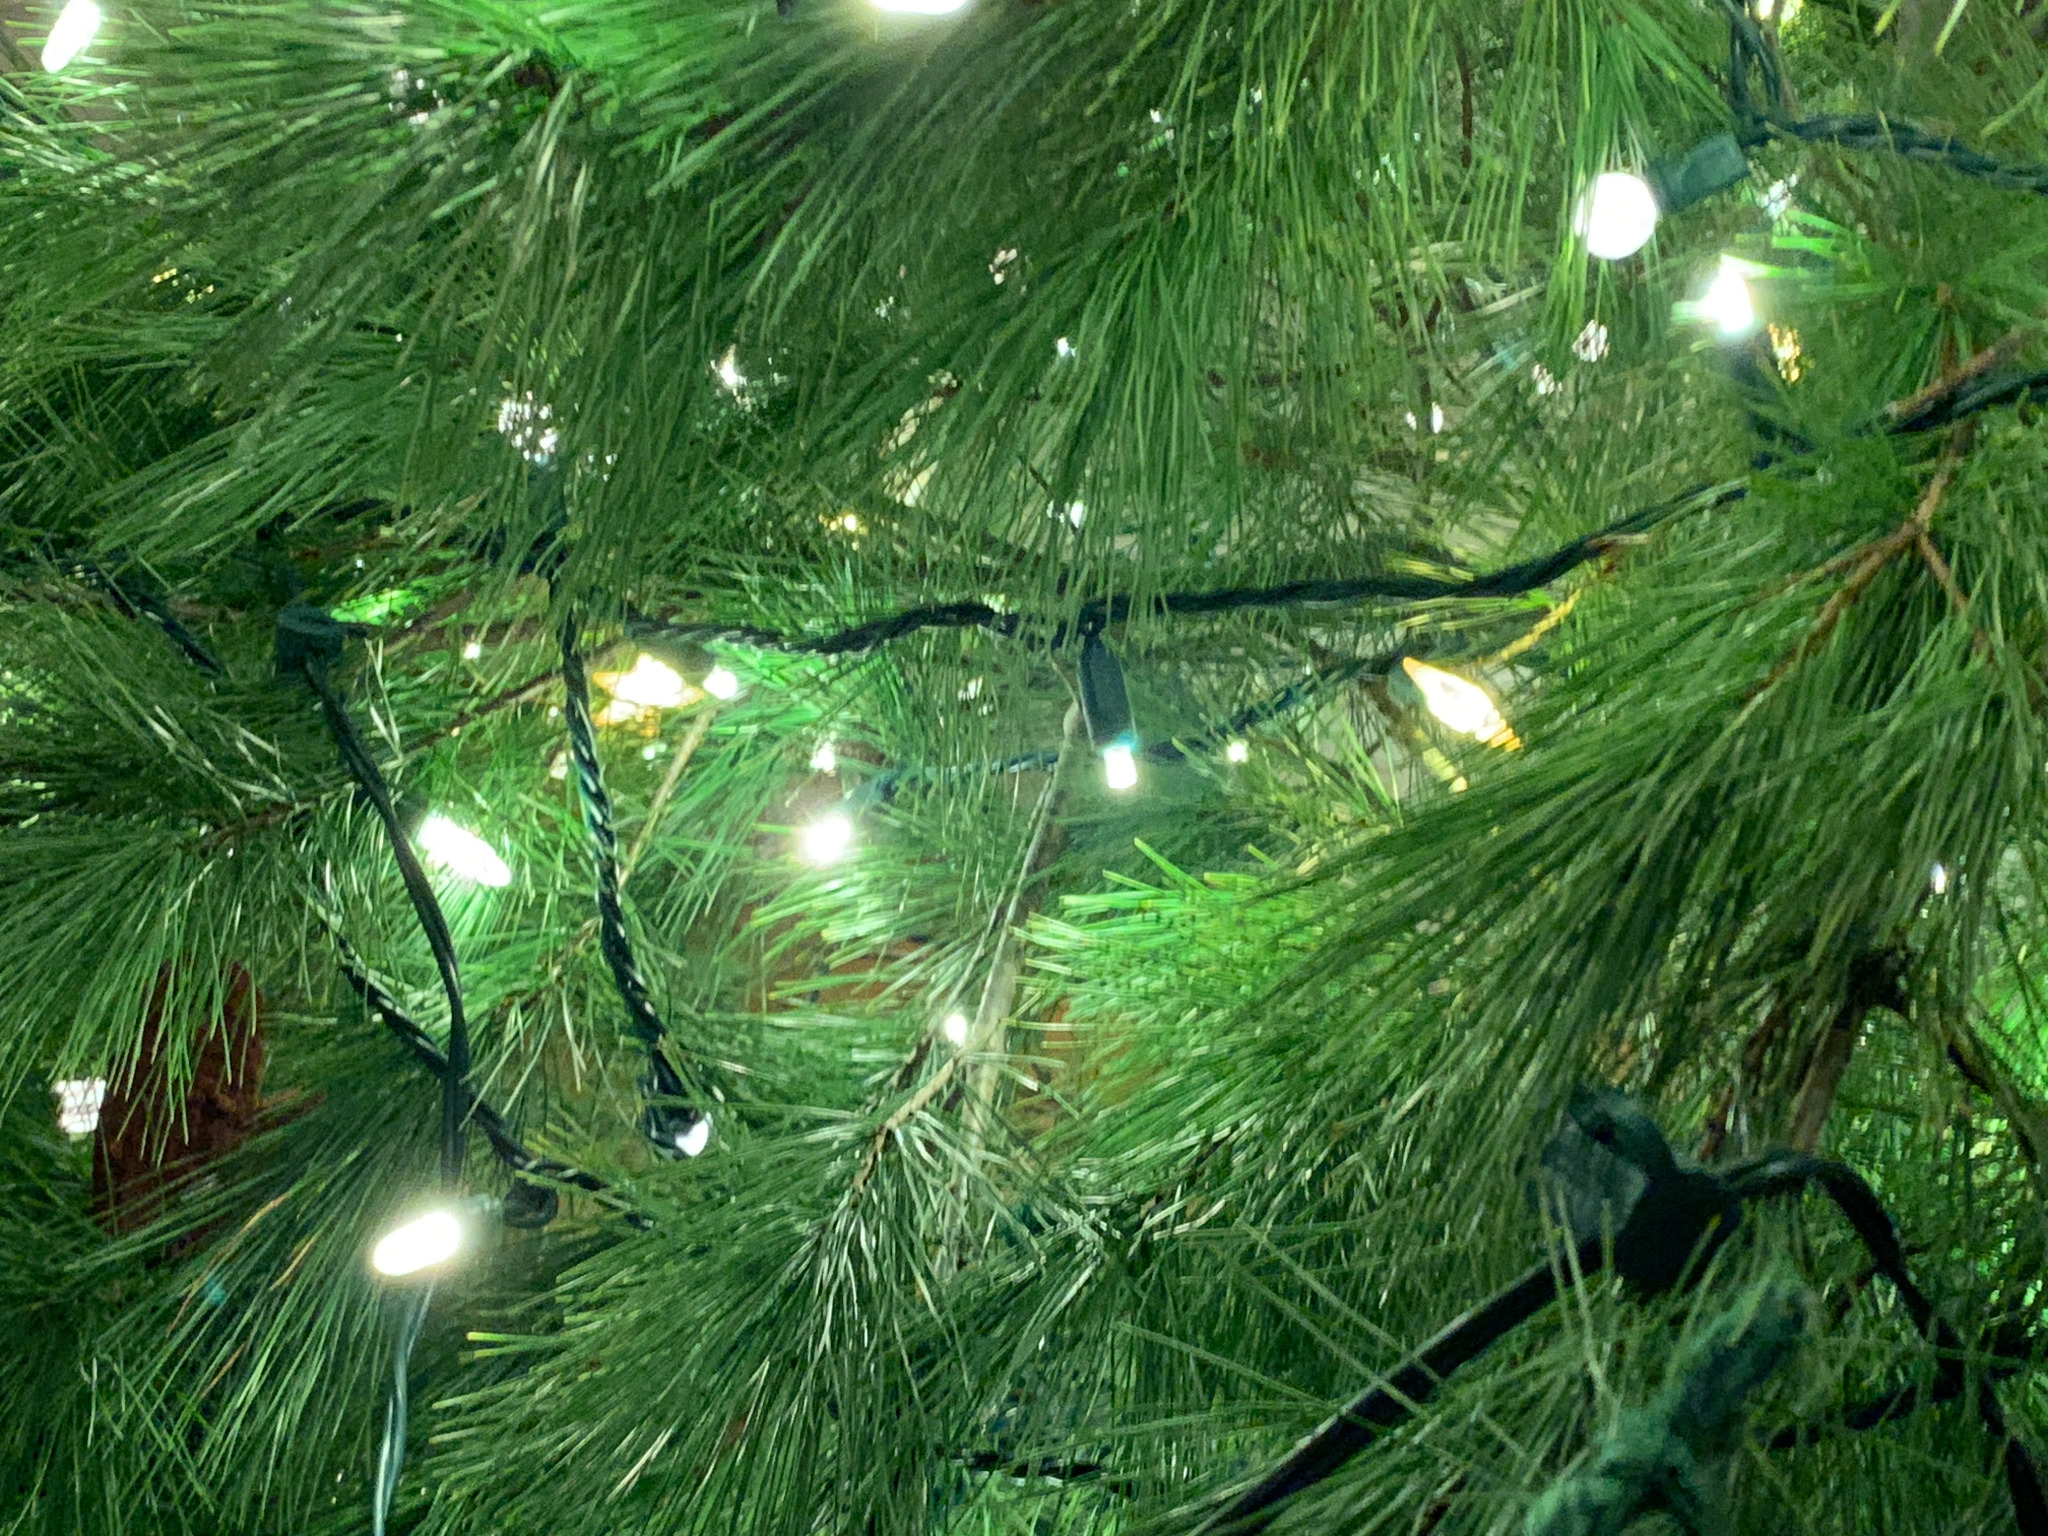 Pine tree branches with holiday lights strung on them